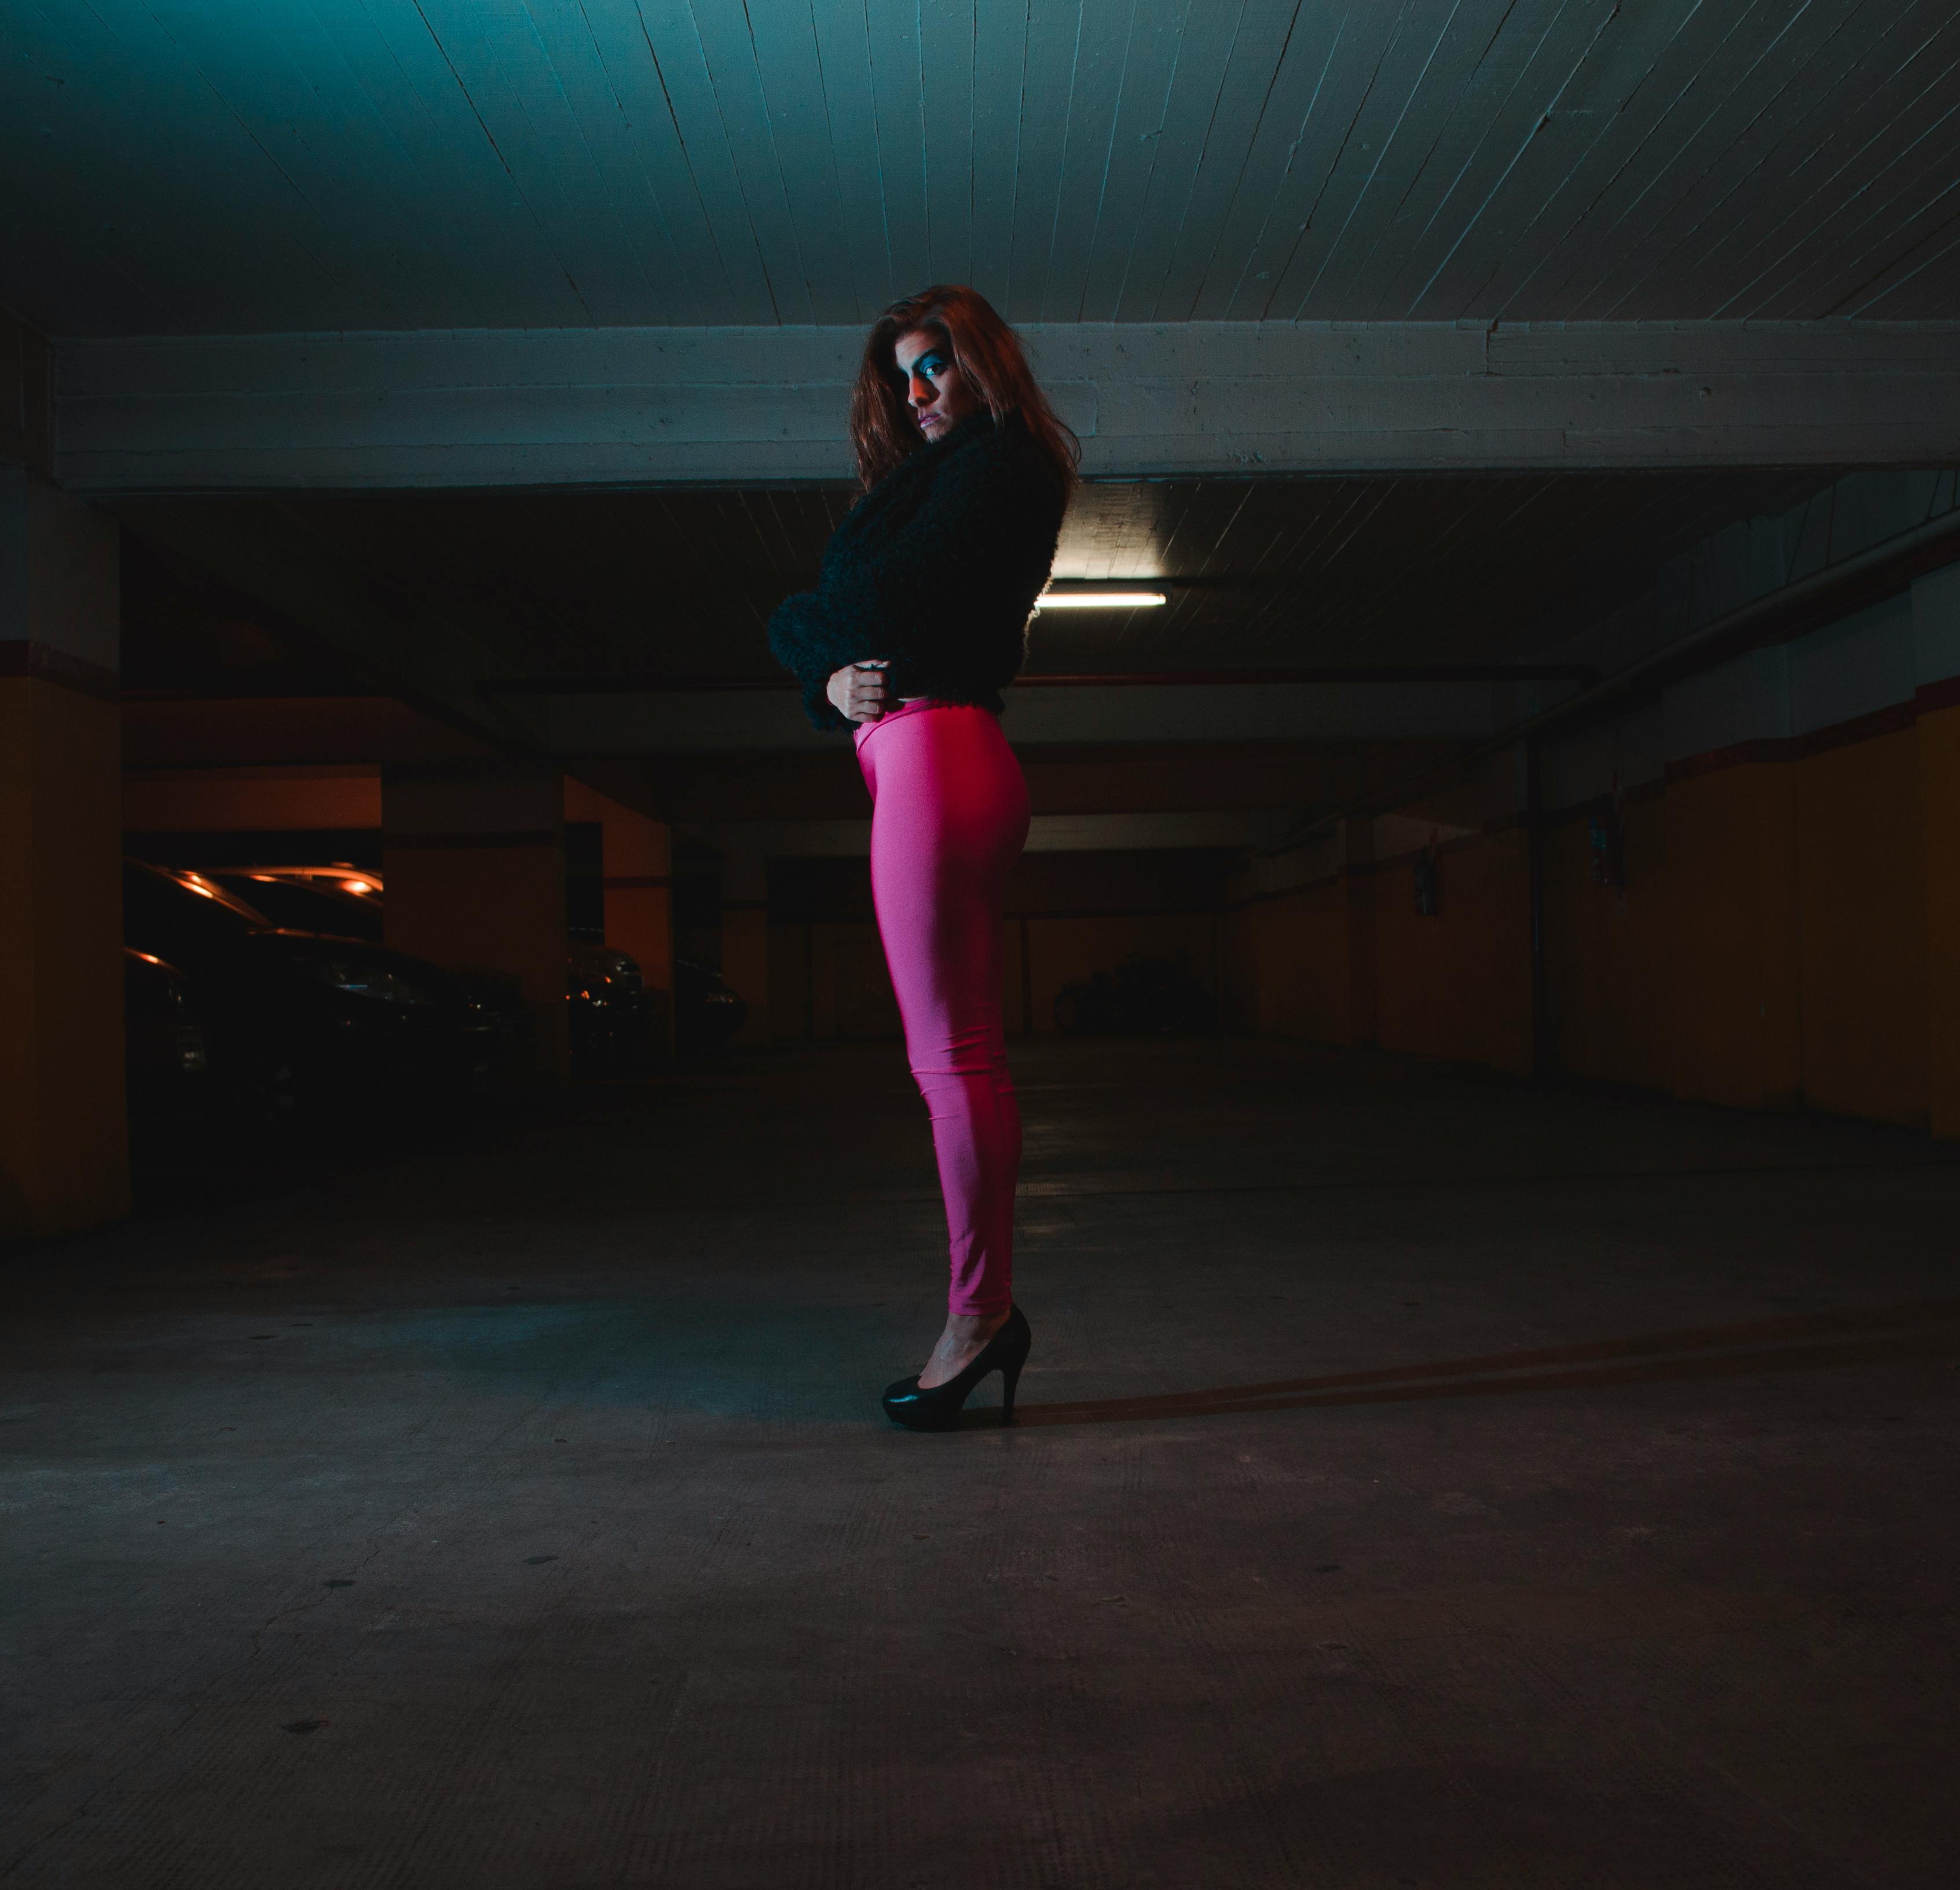 Photo of Woman Wearing Black Shirt and Pink Leggings in Parking Area